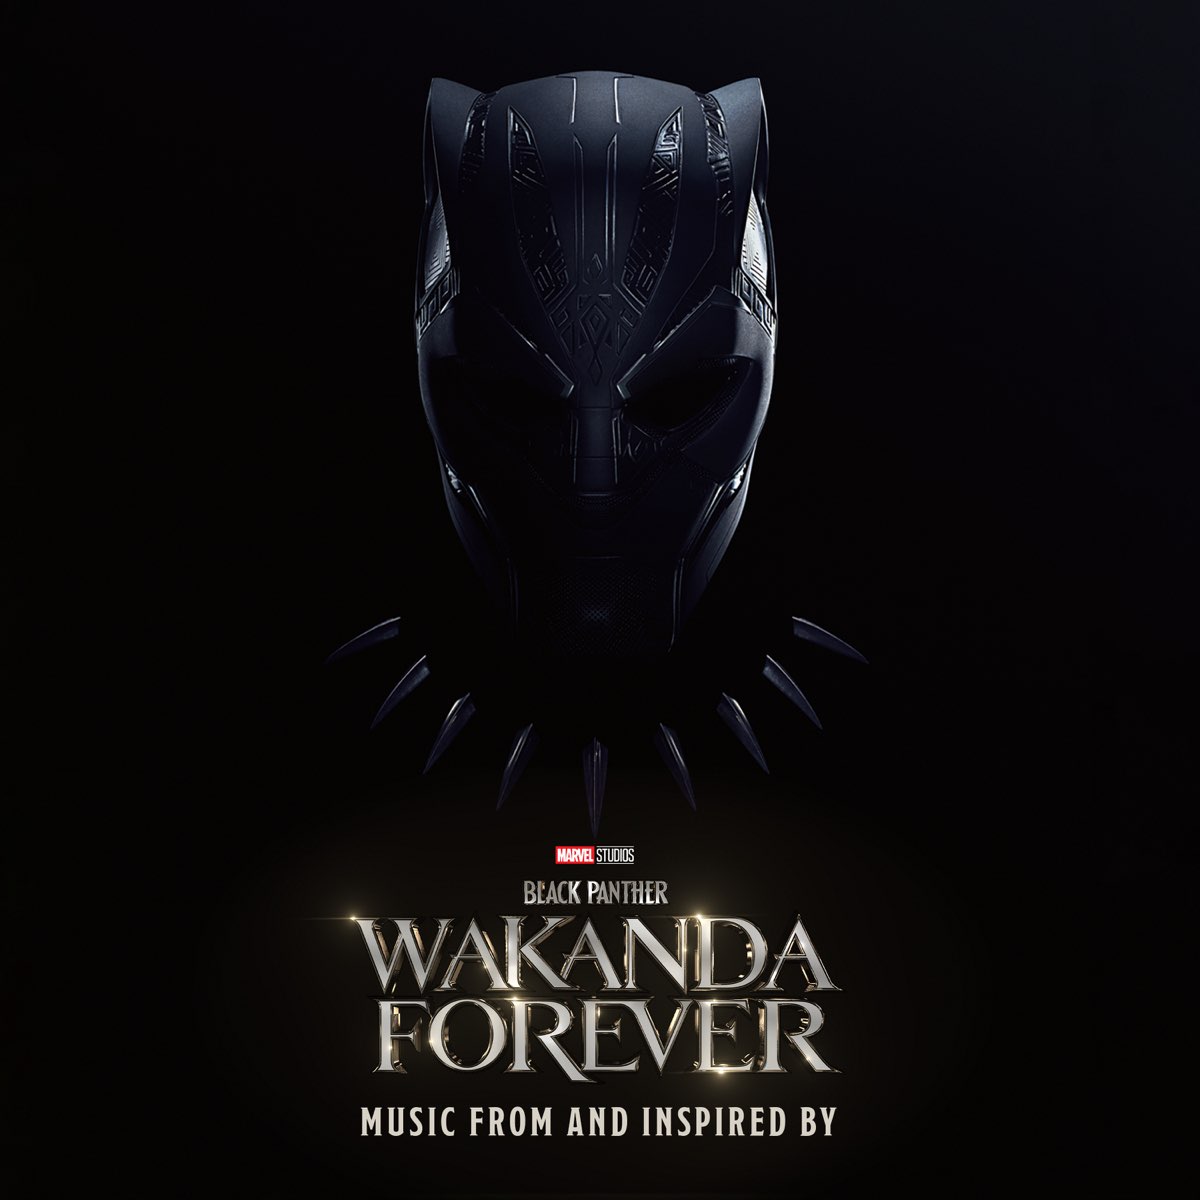 Black Panther: Wakanda Forever - Music From and Inspired By by Rihanna &  Tems on Apple Music